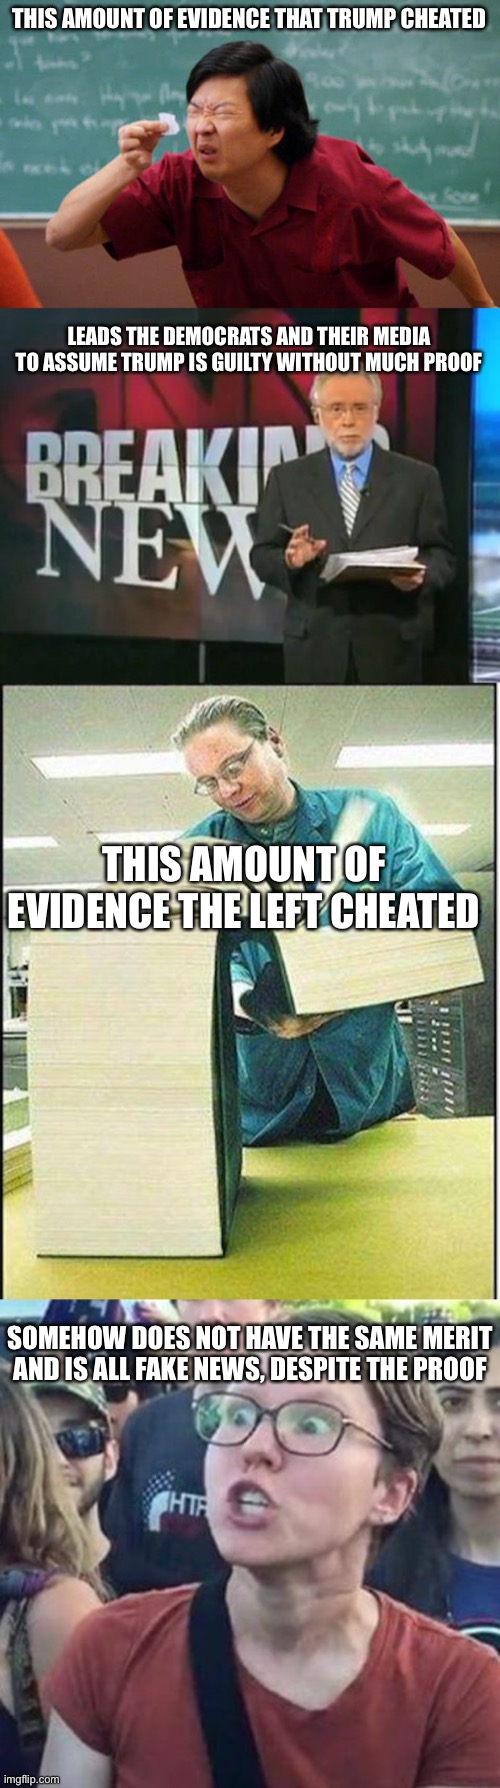 Objective judgement is nowadays blatantly gone from politics | THIS AMOUNT OF EVIDENCE THAT TRUMP CHEATED; LEADS THE DEMOCRATS AND THEIR MEDIA TO ASSUME TRUMP IS GUILTY WITHOUT MUCH PROOF; THIS AMOUNT OF EVIDENCE THE LEFT CHEATED; SOMEHOW DOES NOT HAVE THE SAME MERIT AND IS ALL FAKE NEWS, DESPITE THE PROOF | image tagged in tiny piece of paper,cnn breaking news,big book,trigger a leftist,memes,politics | made w/ Imgflip meme maker